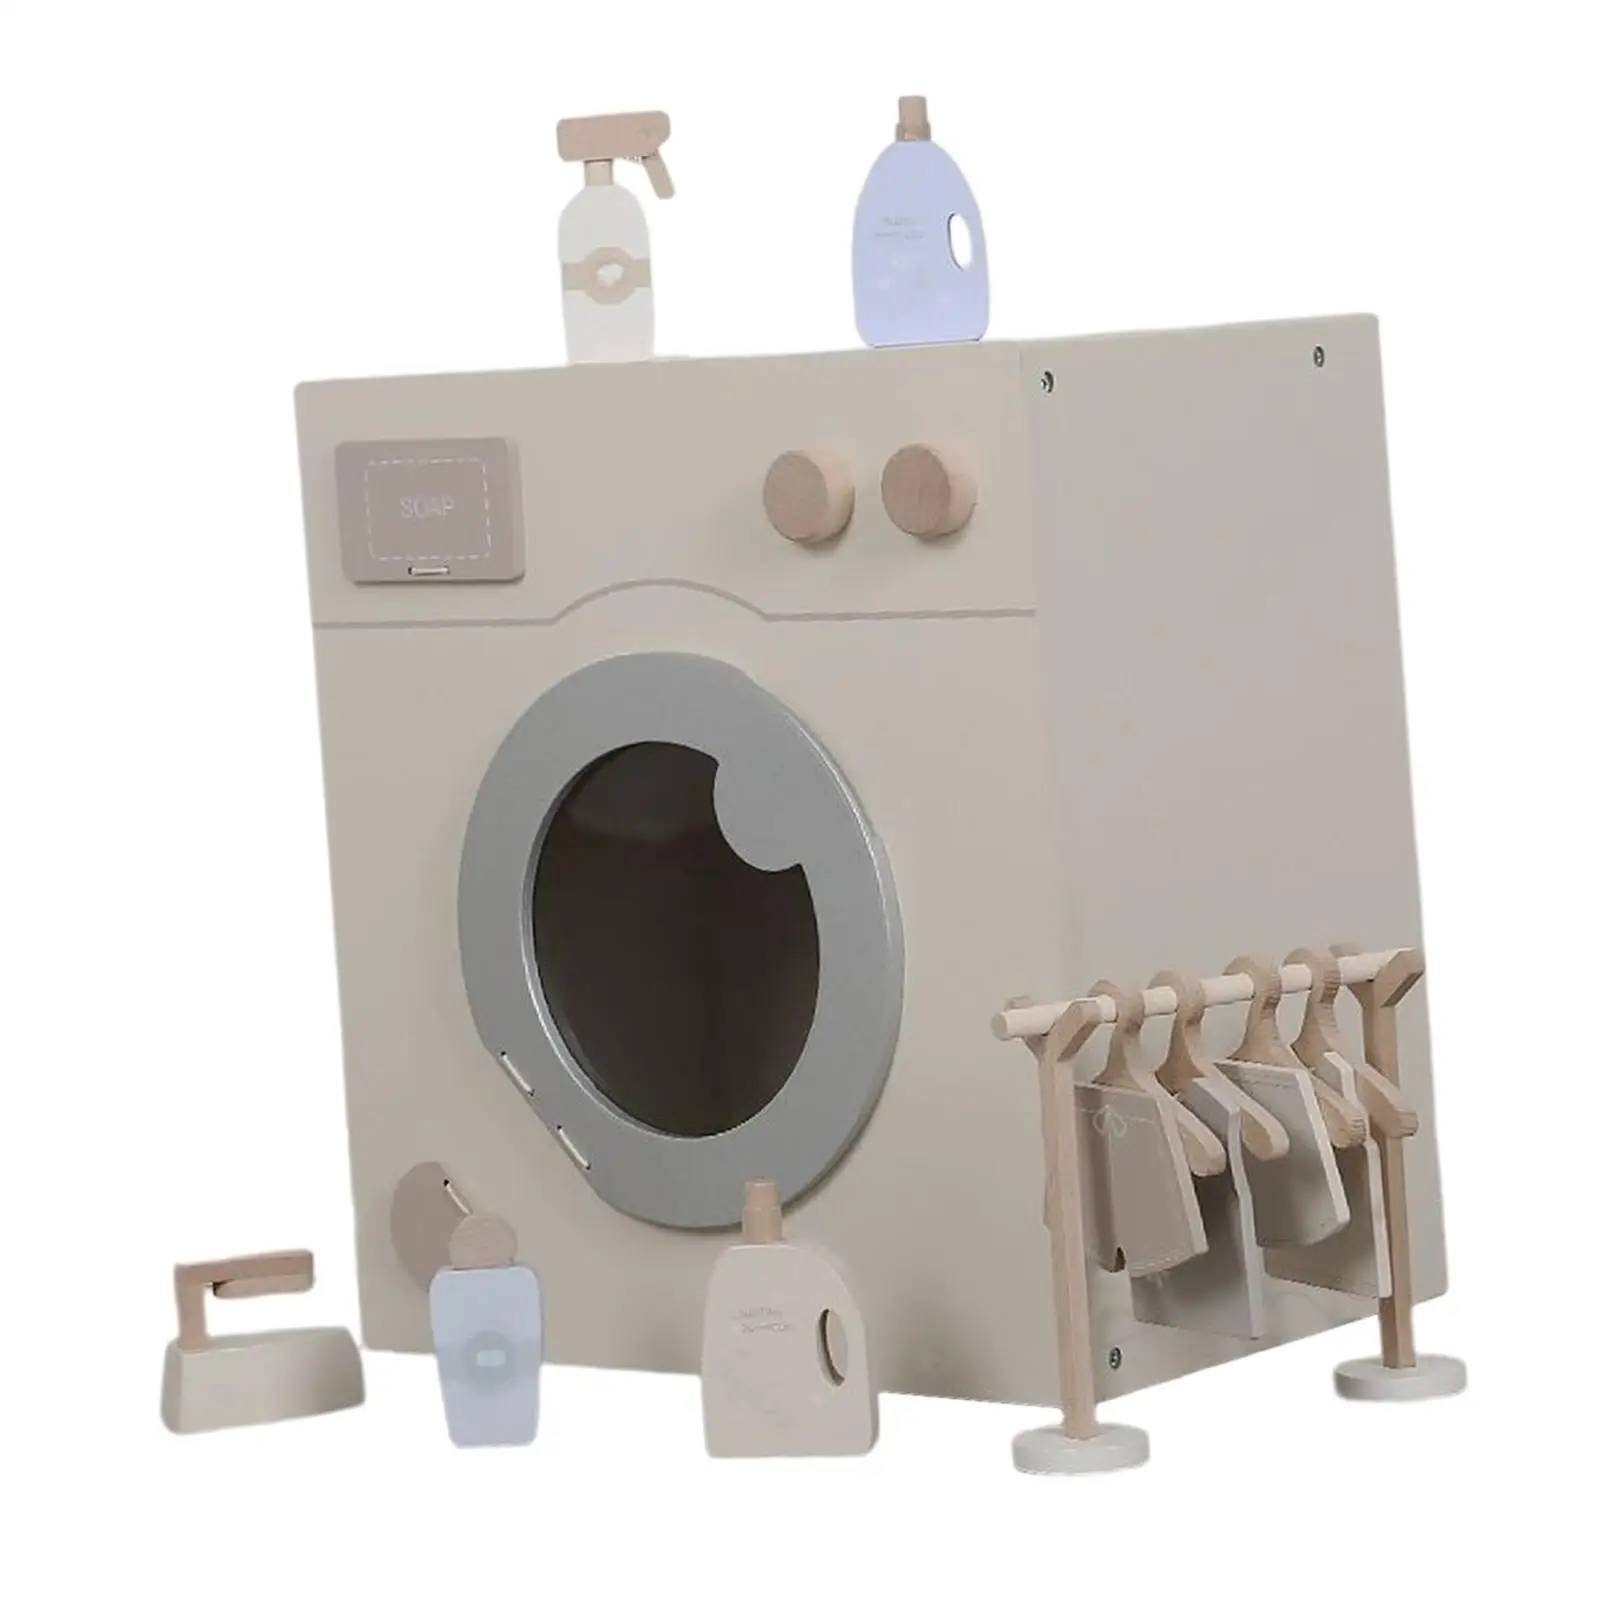 Wooden Washing Machine Playset Appliance Pretend Play, Realistic, Doll House